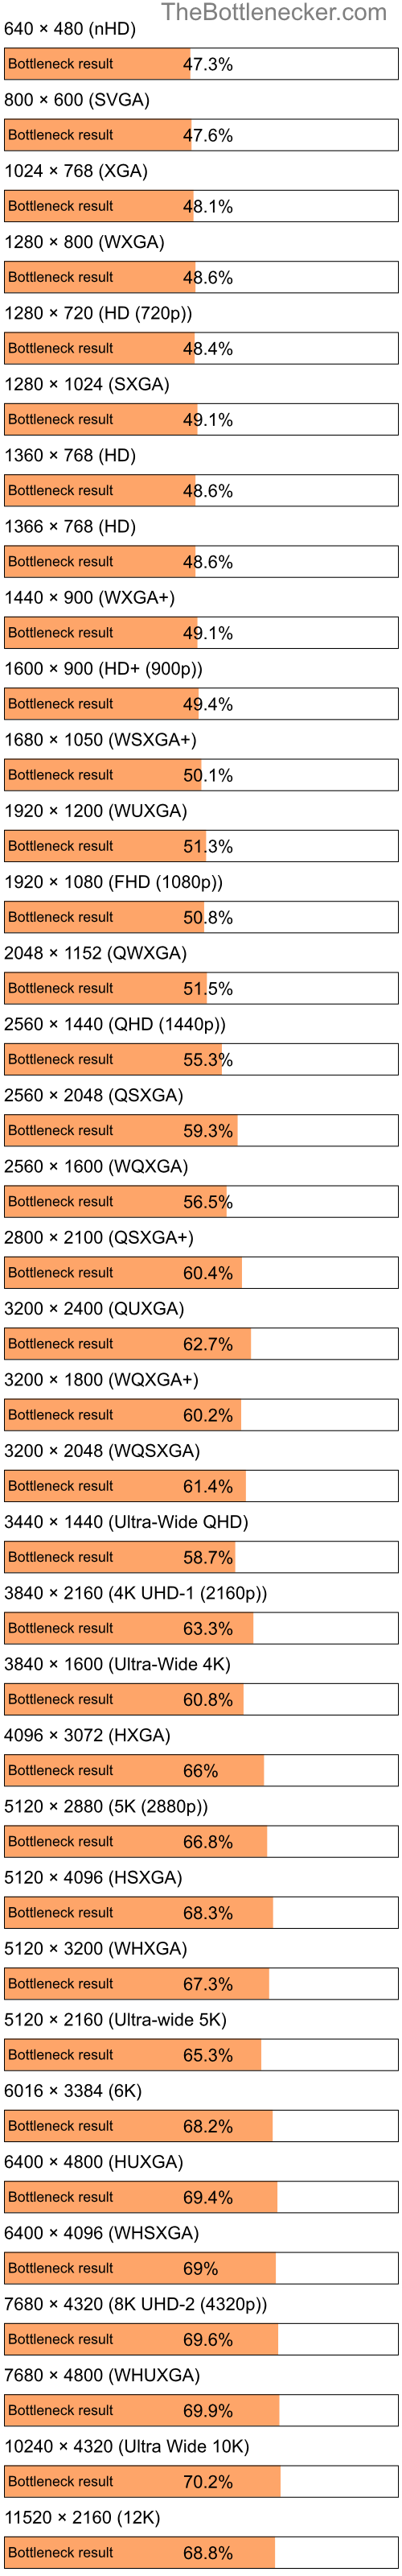 Bottleneck results by resolution for Intel Pentium 4 and NVIDIA GeForce Go 6800 in Processor Intense Tasks